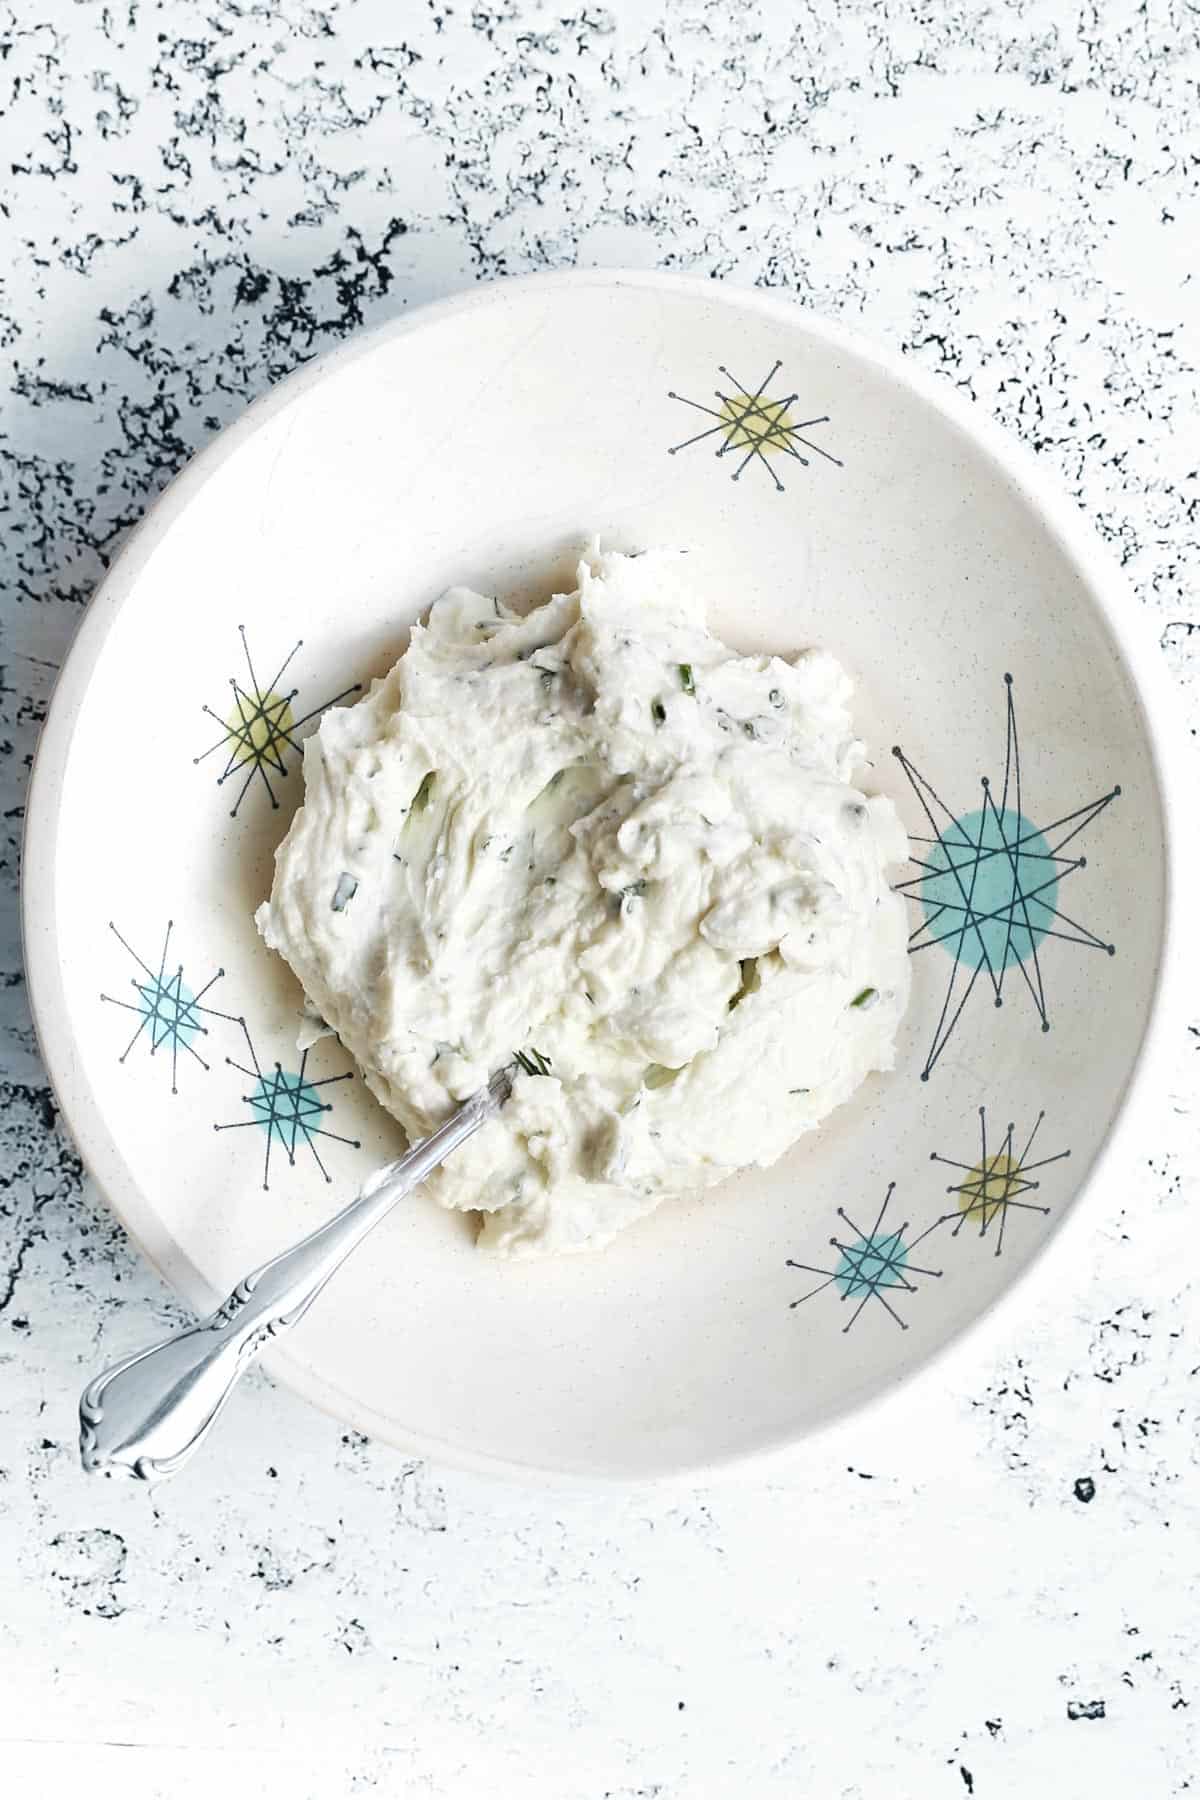 Herbed goat cheese spread in a bowl